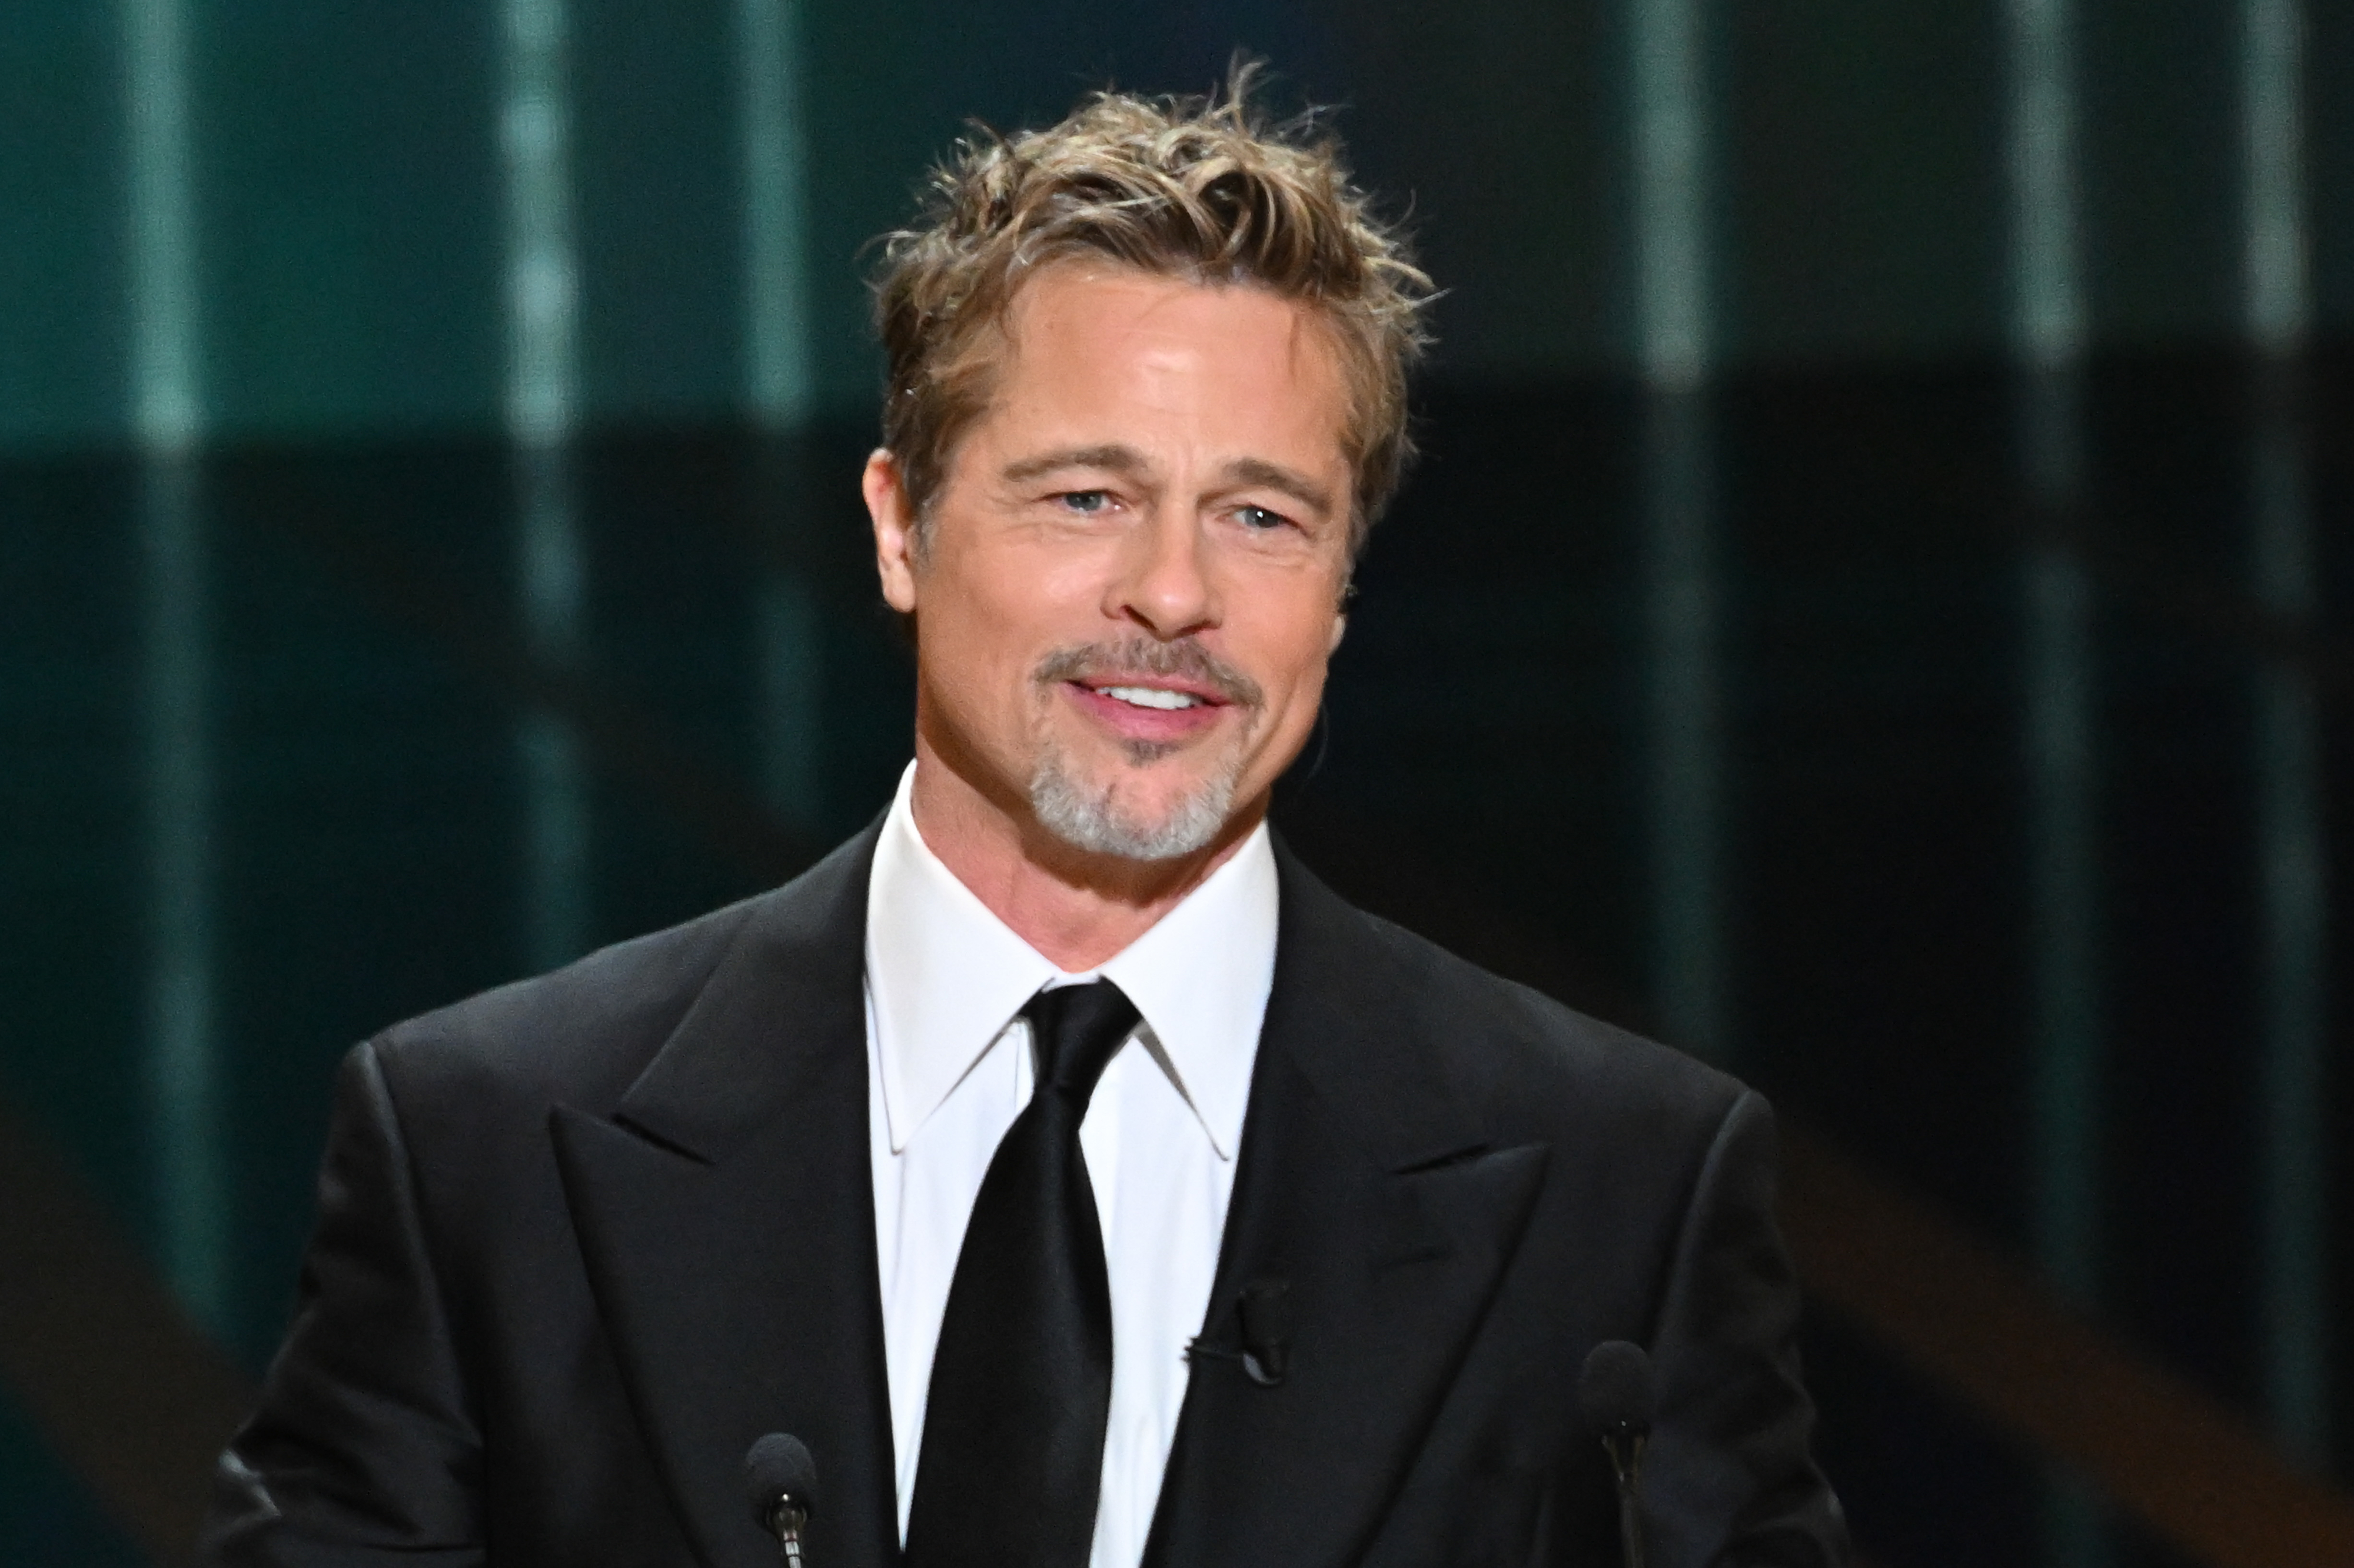 Brad Pitt smiling, wearing a black suit and black tie